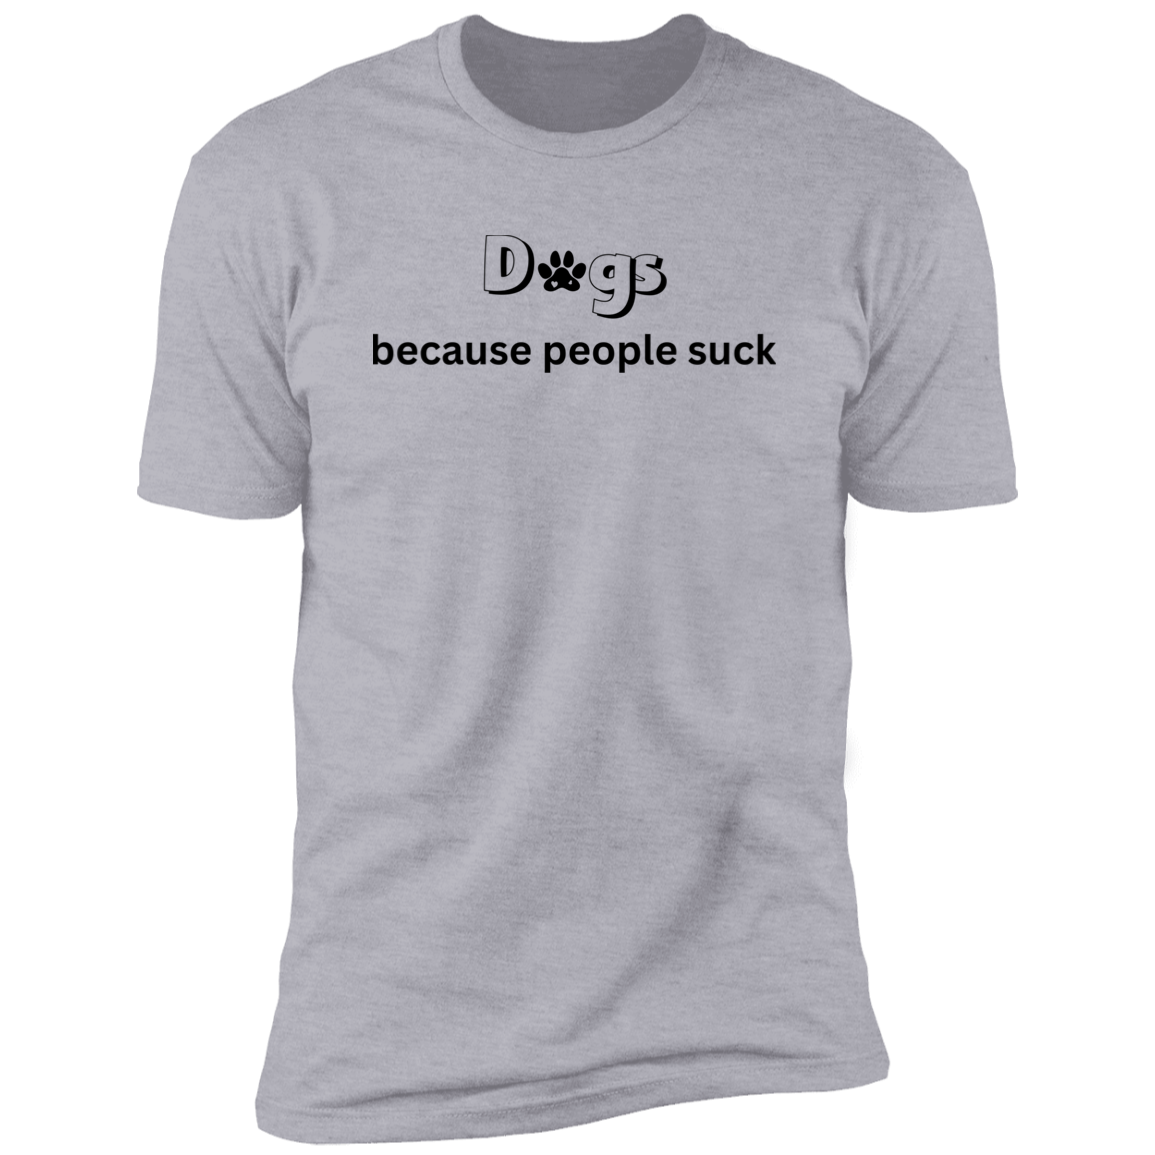 Dogs Because People Such t-shirt, funny dog shirt for humans, in light heather gray